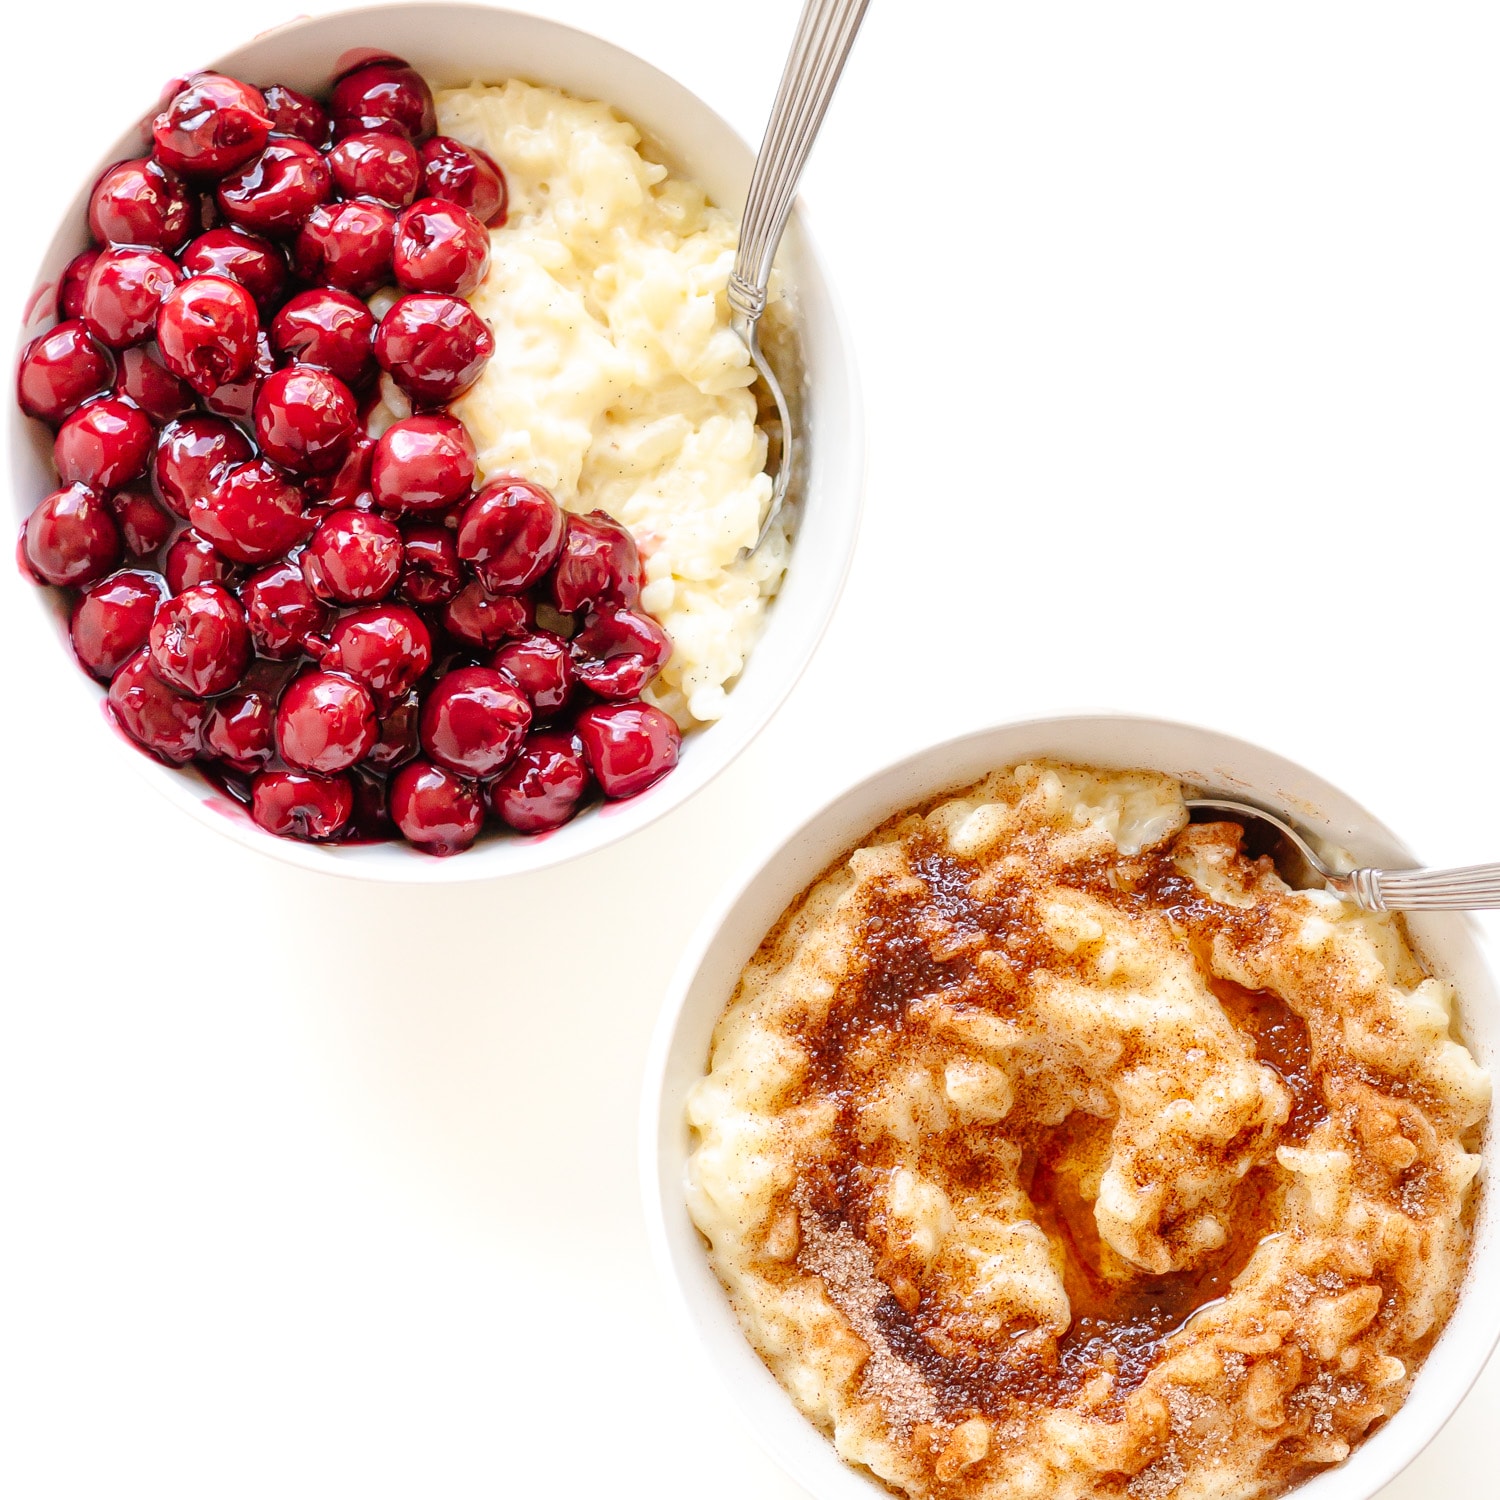 Two bowls of Milchreis/Reisbrei (German Rice Pudding), one topped with warm cherries and the other with cinnamon sugar and brown butter.